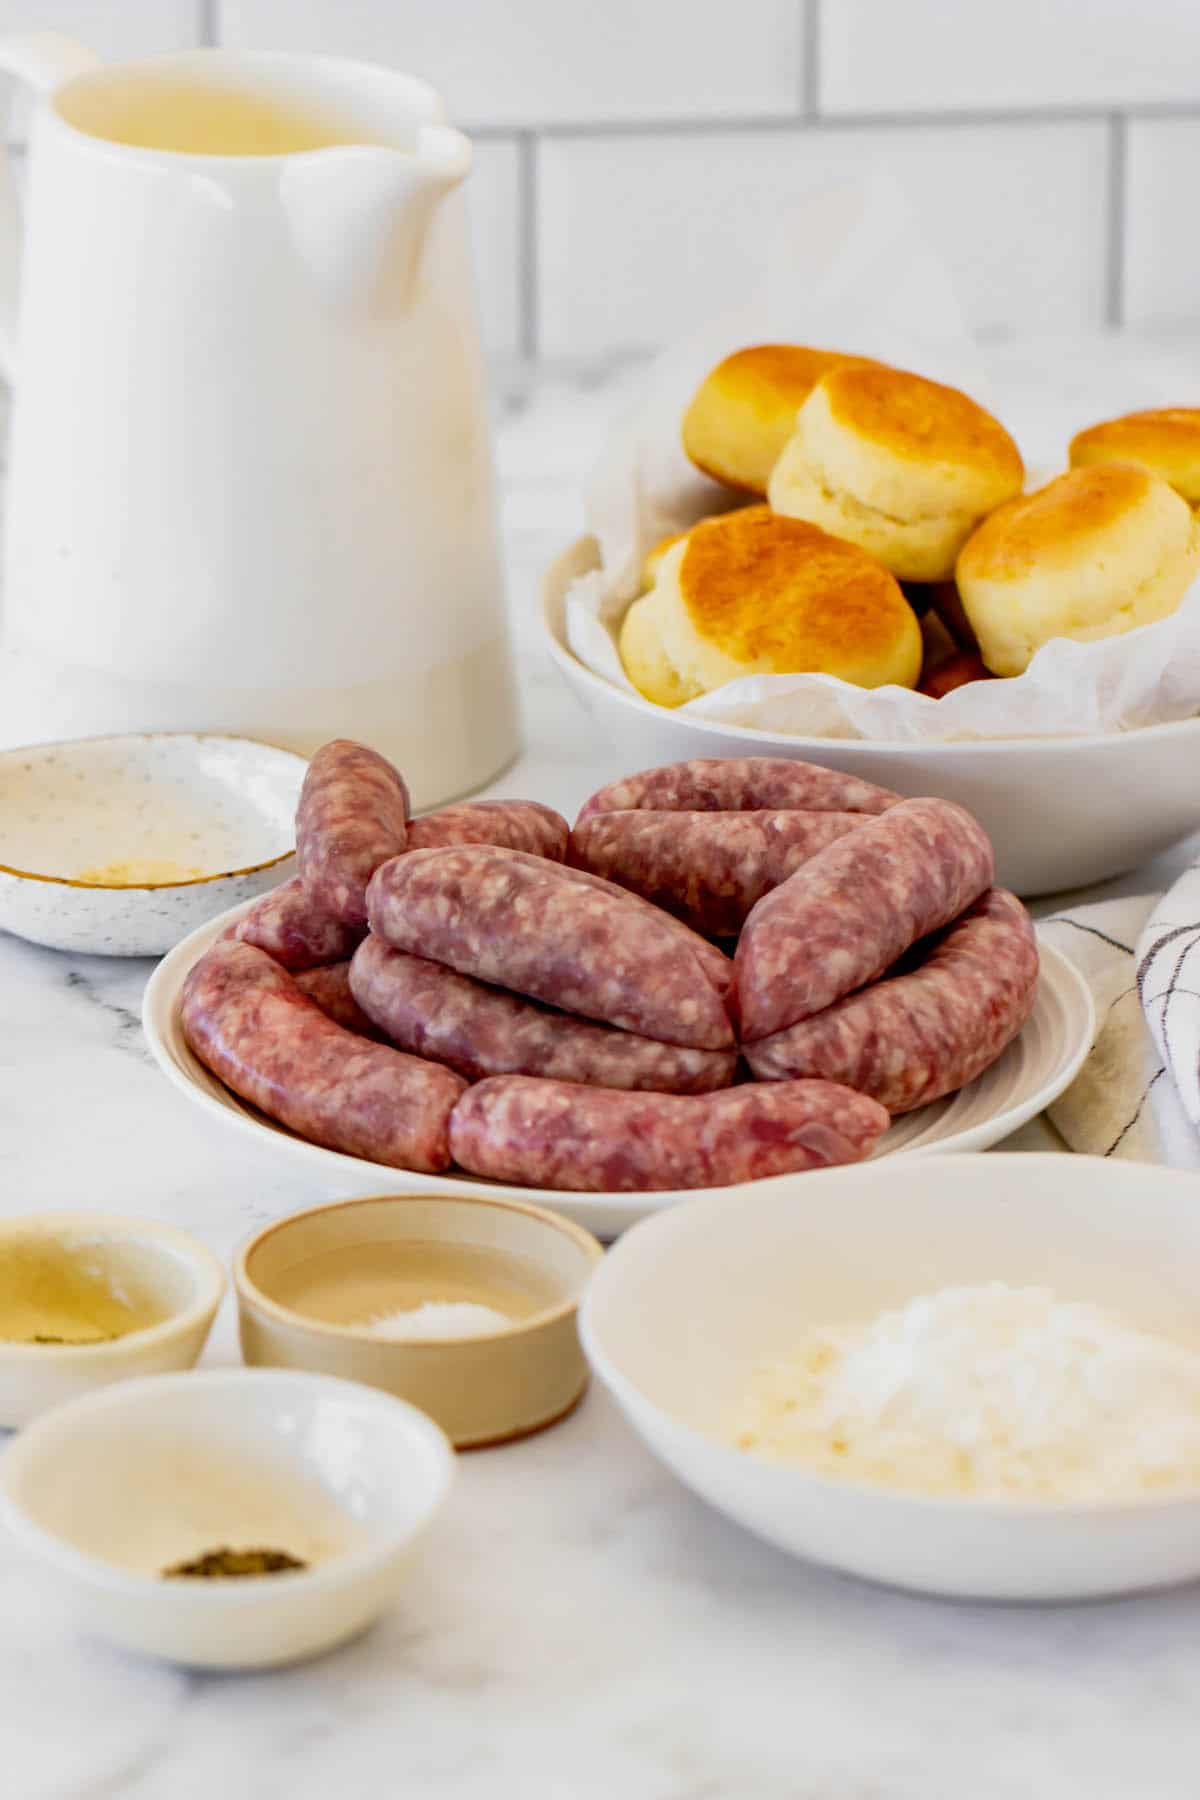 A Plate of Sausage, a Bowl of Biscuits and the Rest of the Ingredients on a Countertop